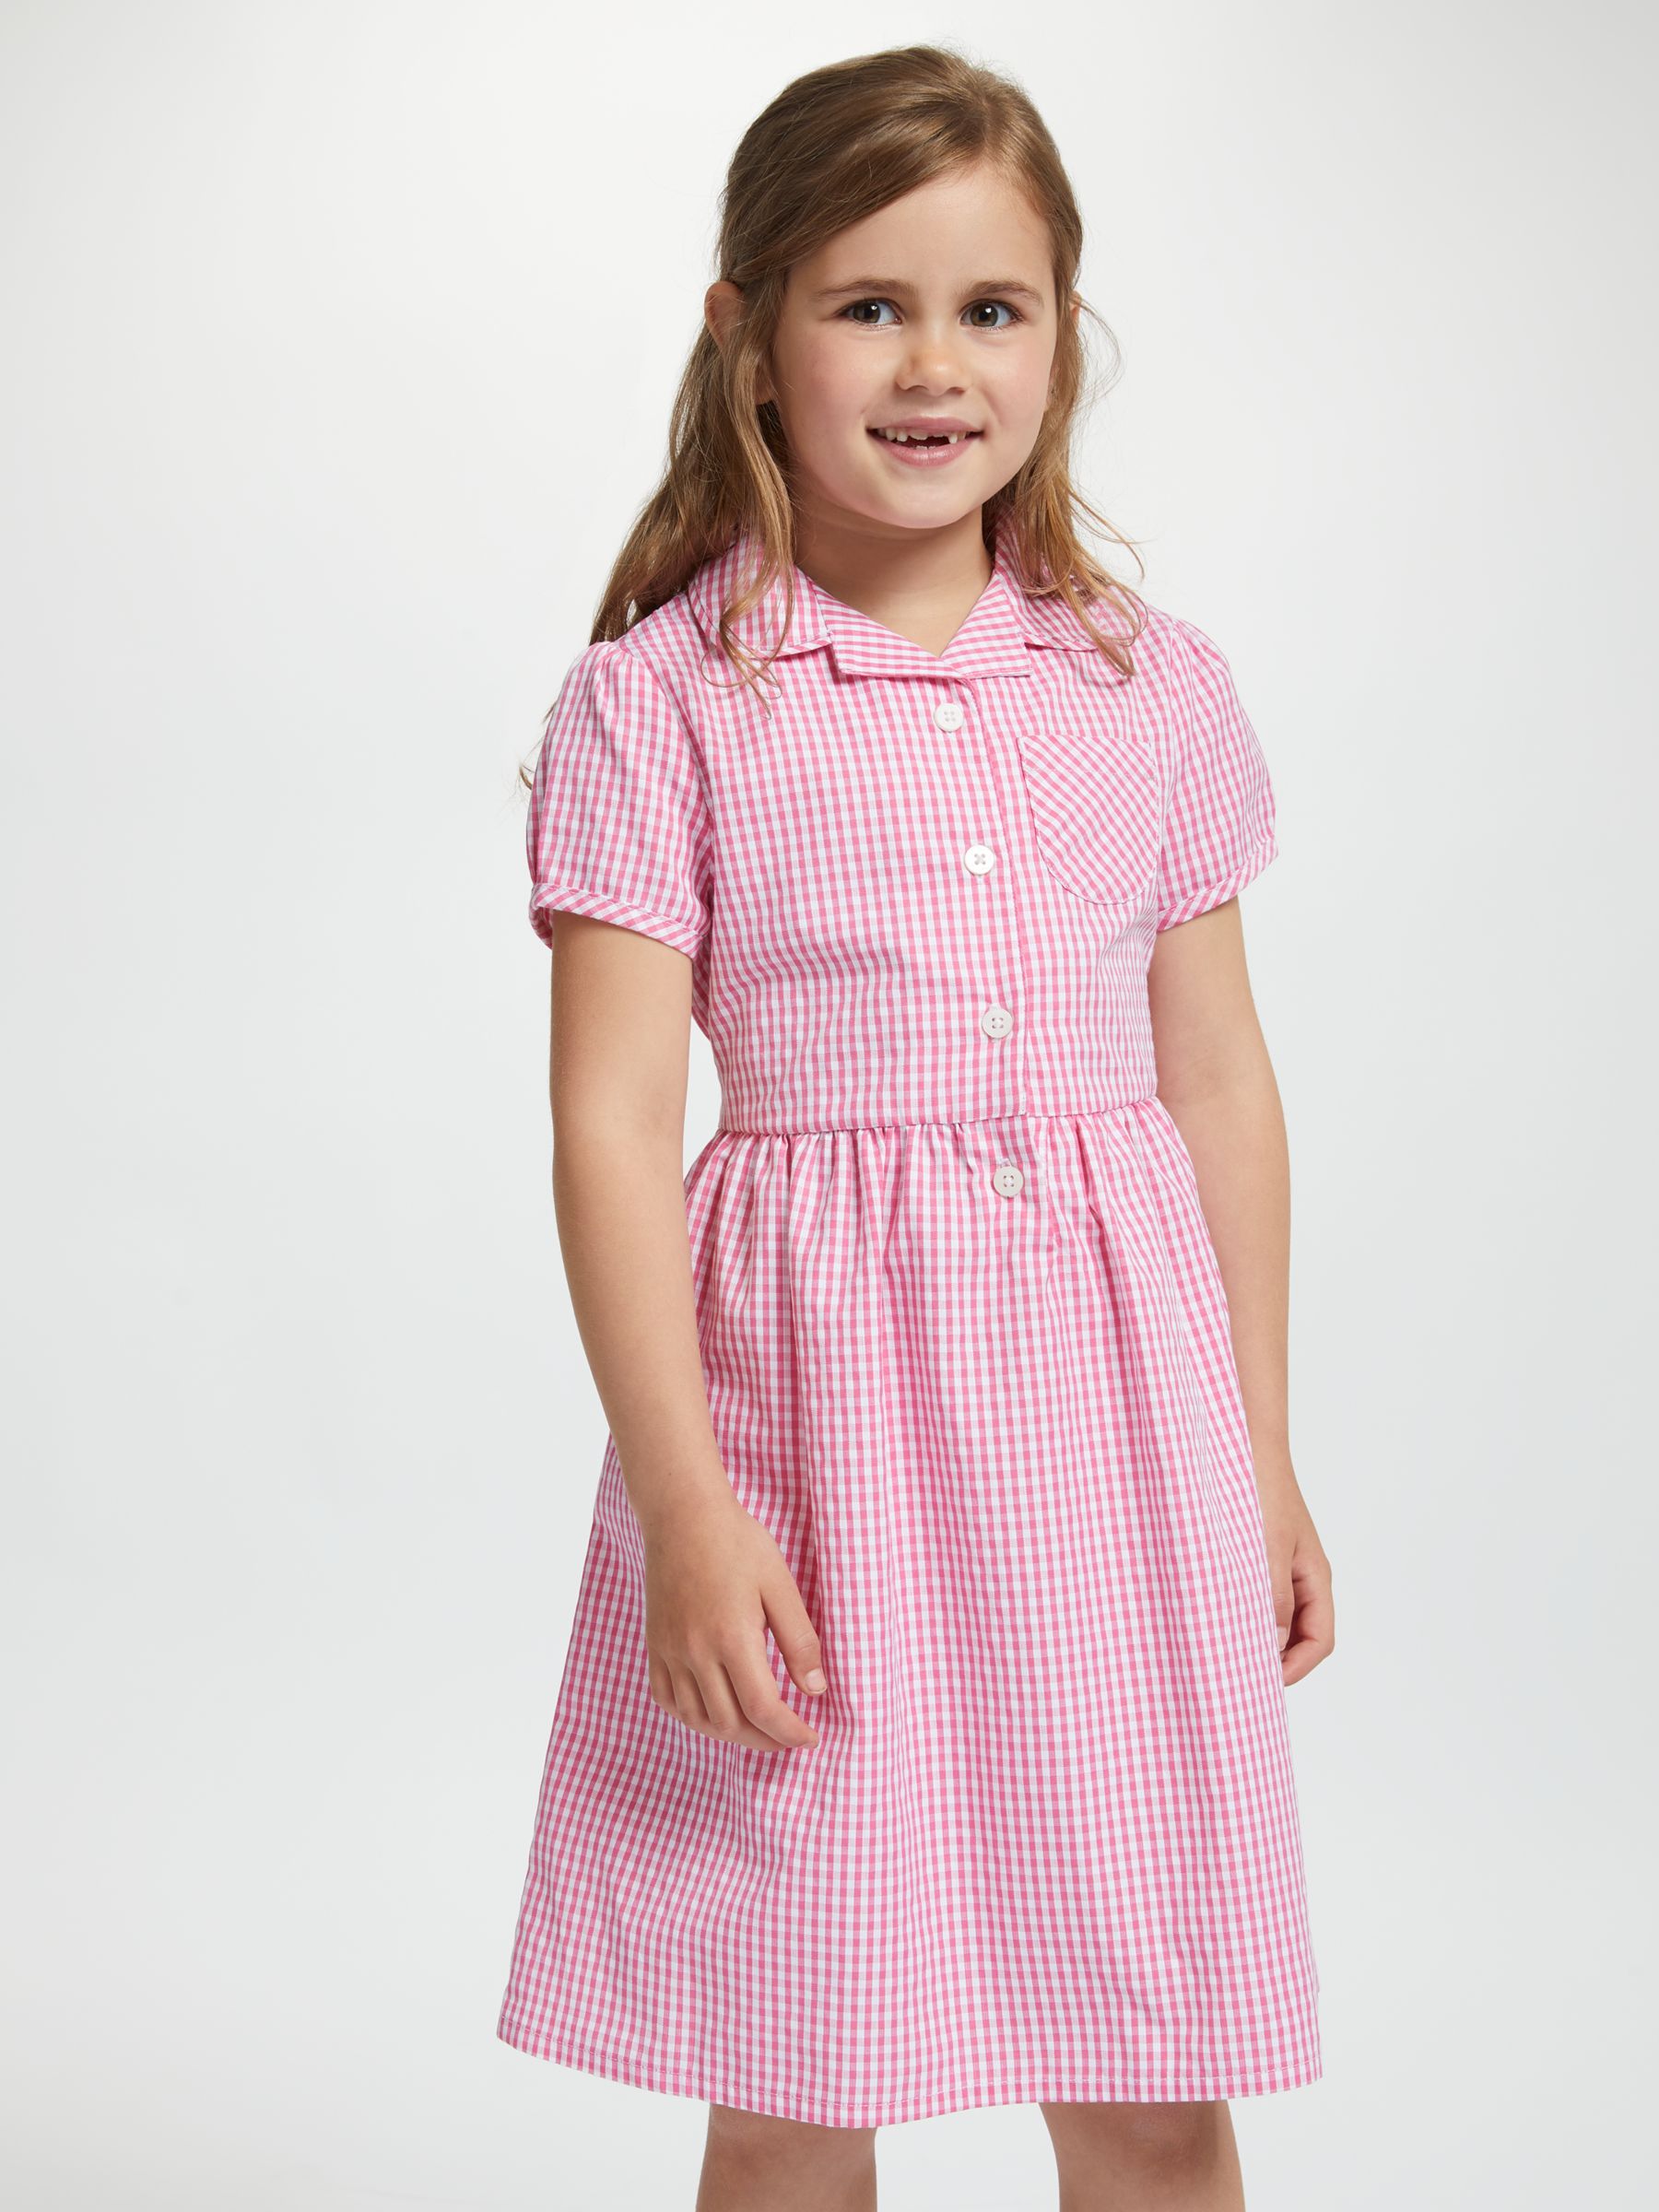 John Lewis & Partners School Belted Gingham Checked Summer Dress at